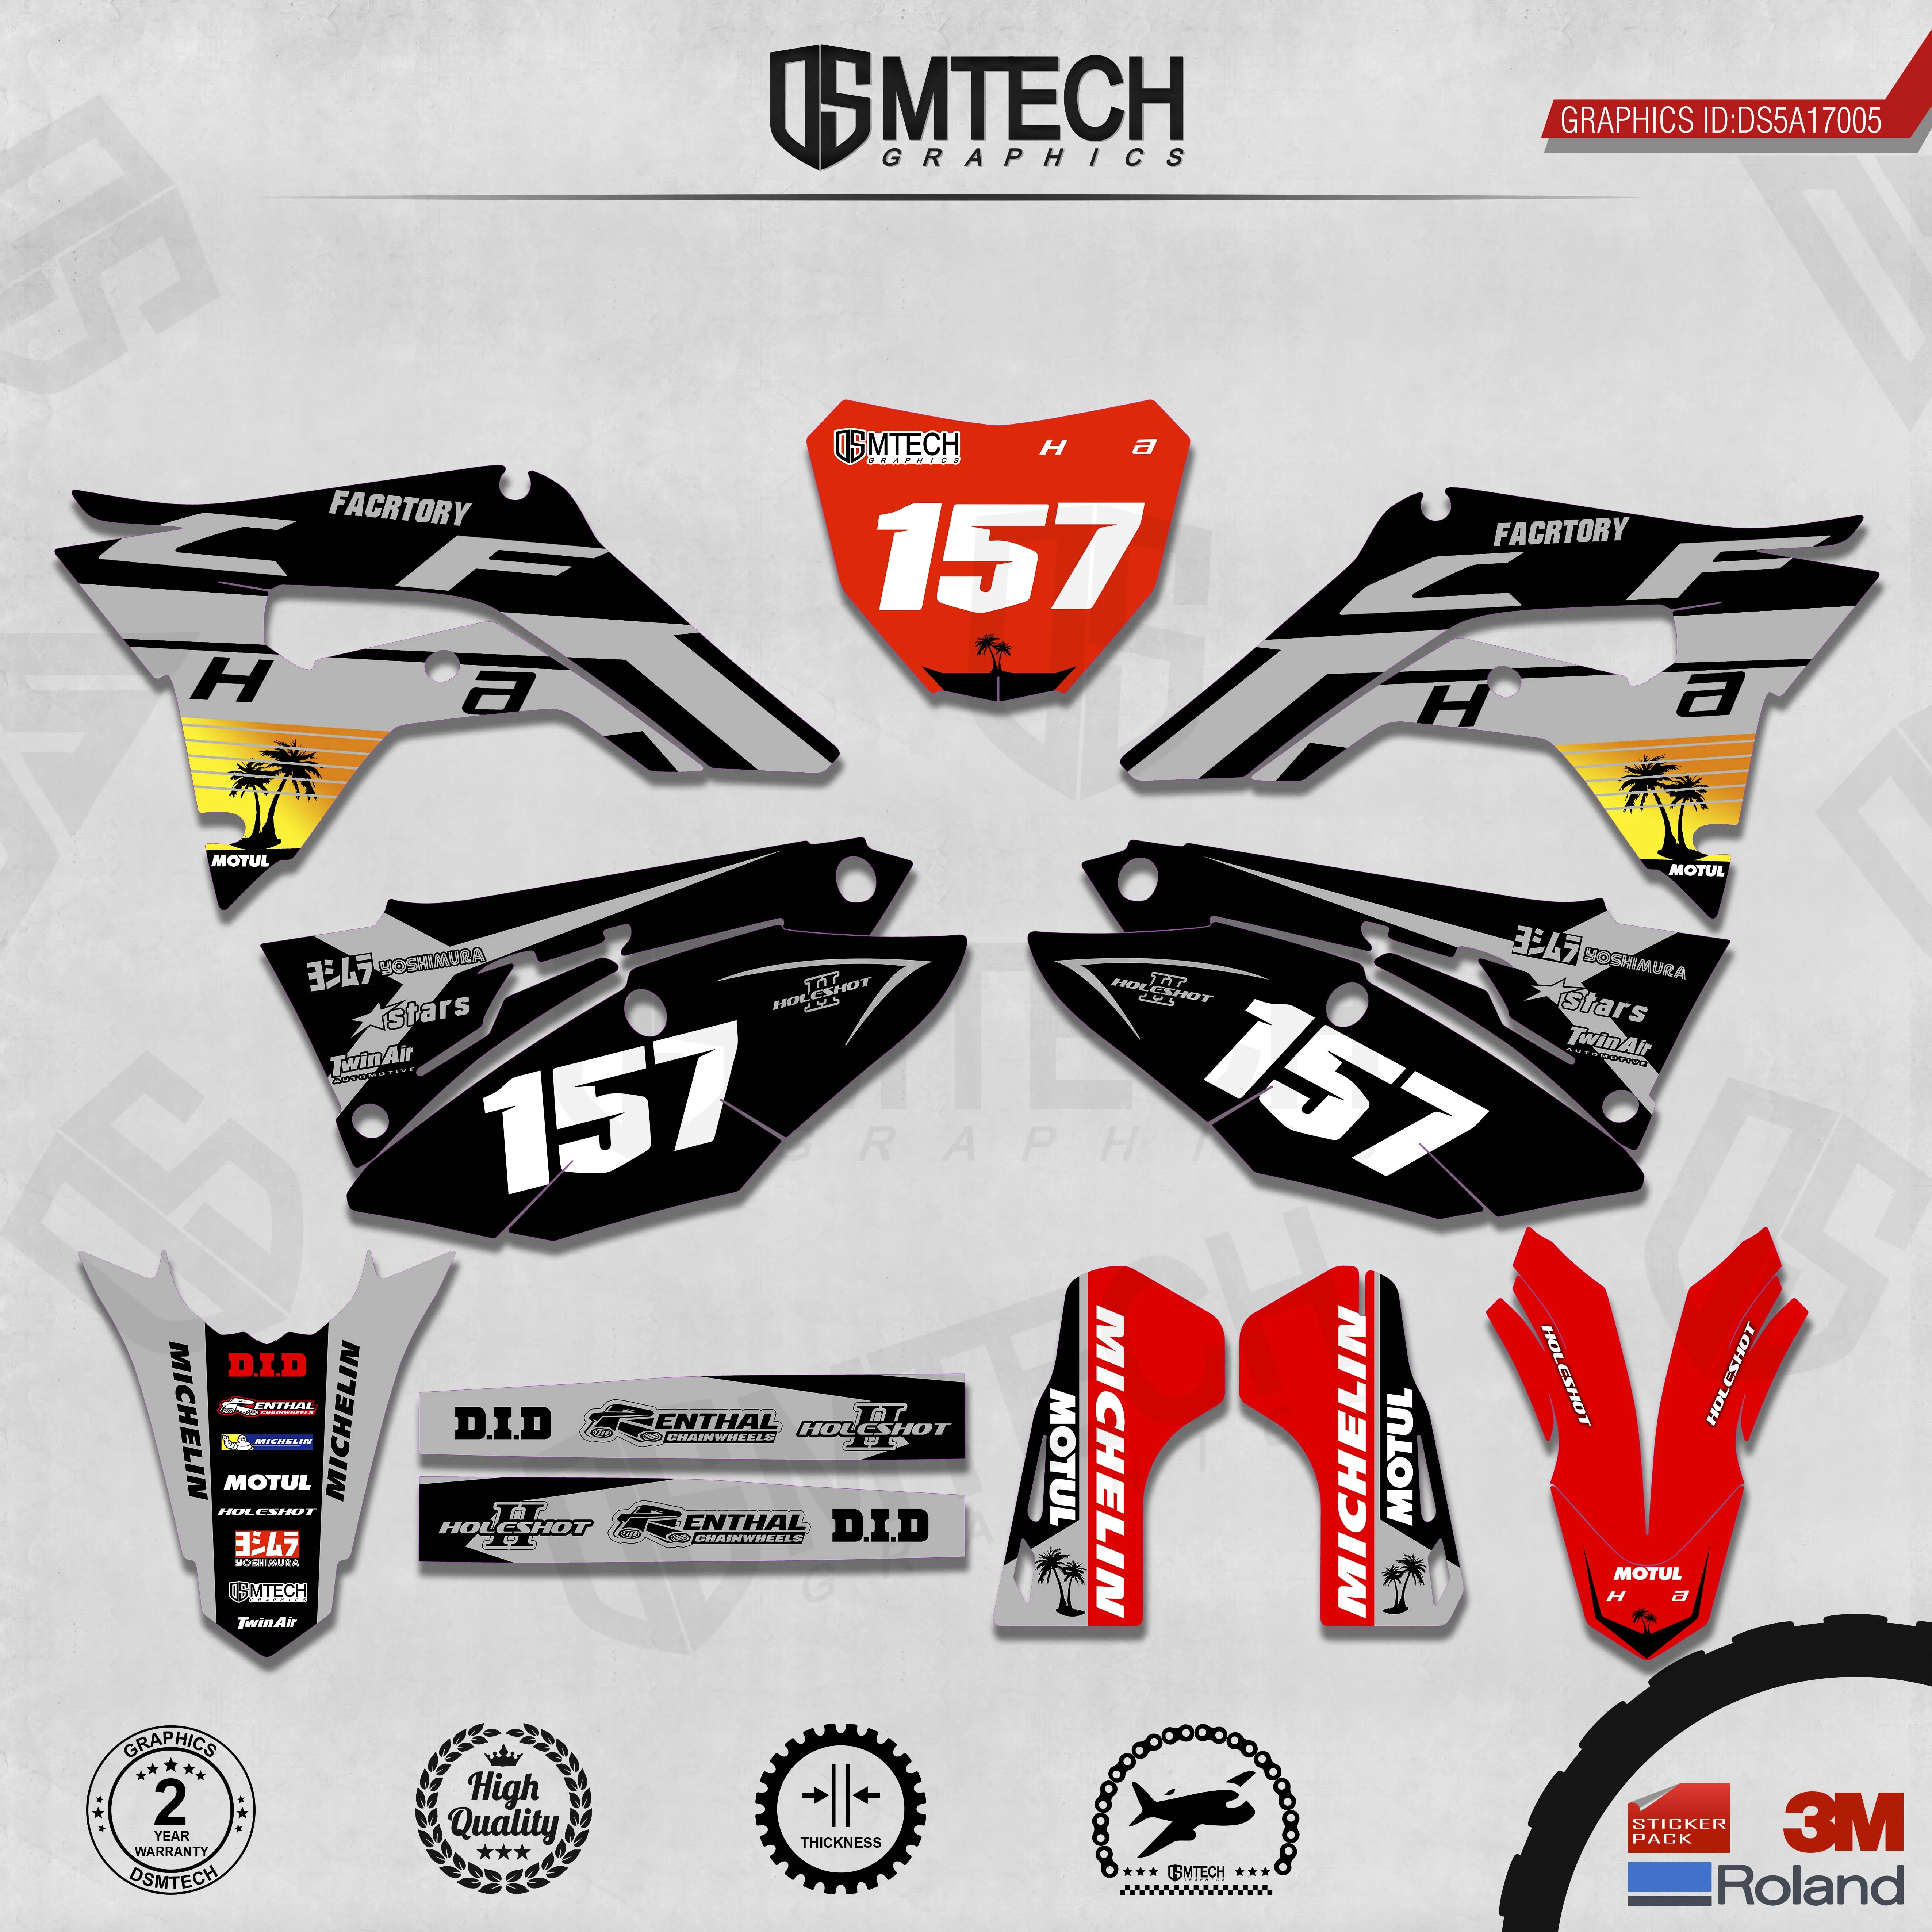 DSMTECH Customized Team Graphics Backgrounds Decals 3M Custom Stickers For 2018-2020 CRF250R 2017 2018 2019-2020 CRF450R 005